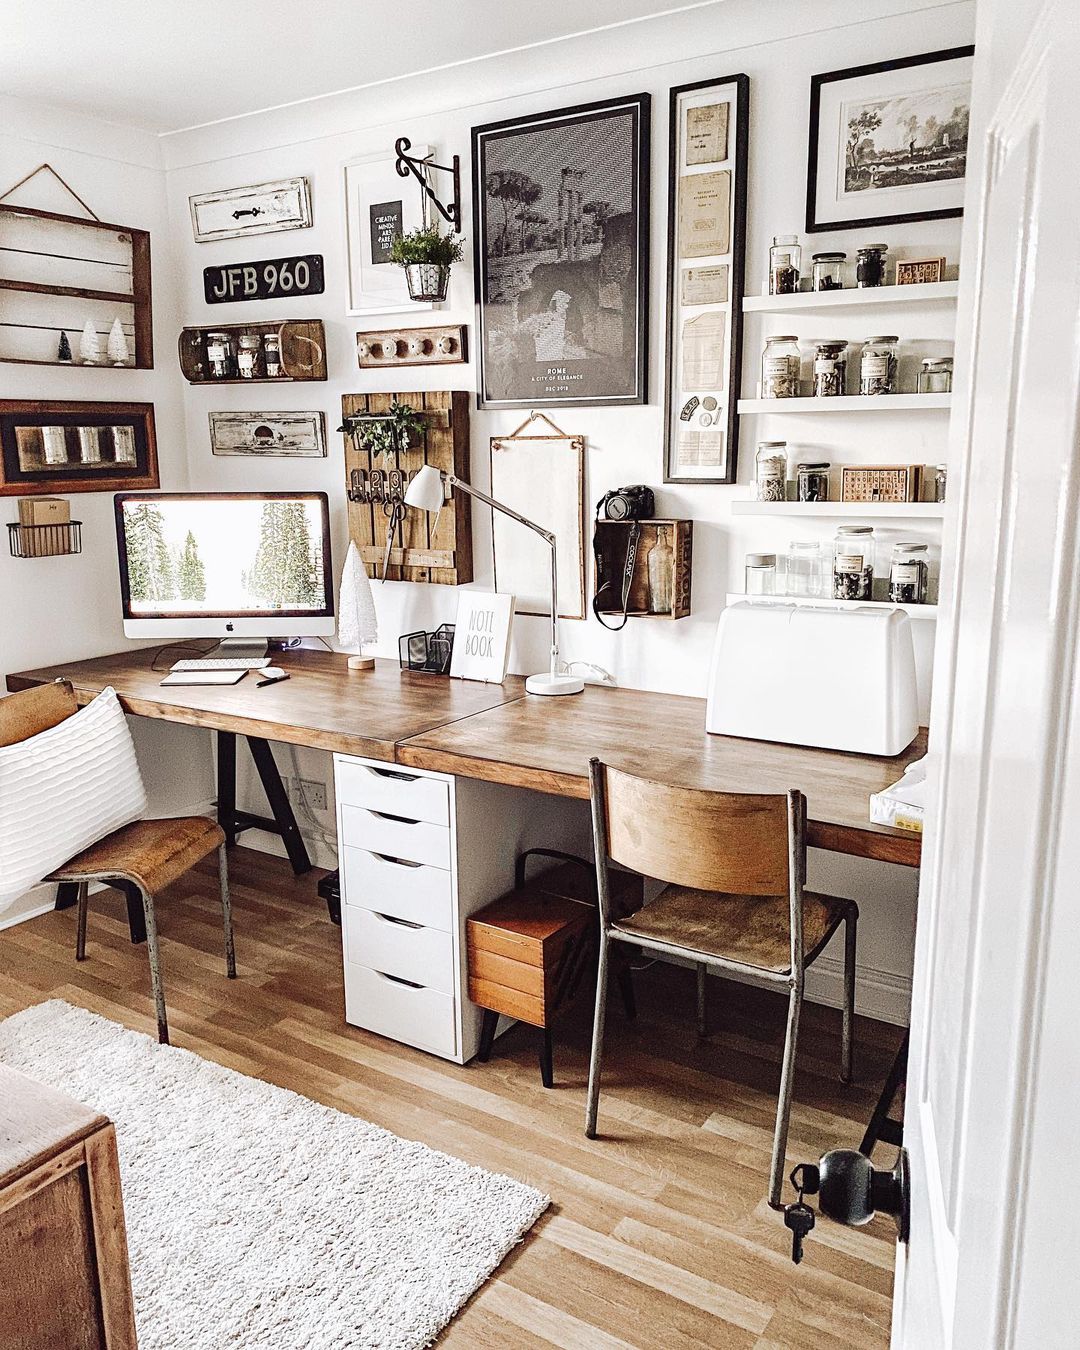 Incorporate Vintage Elements for a Rustic Office Feel